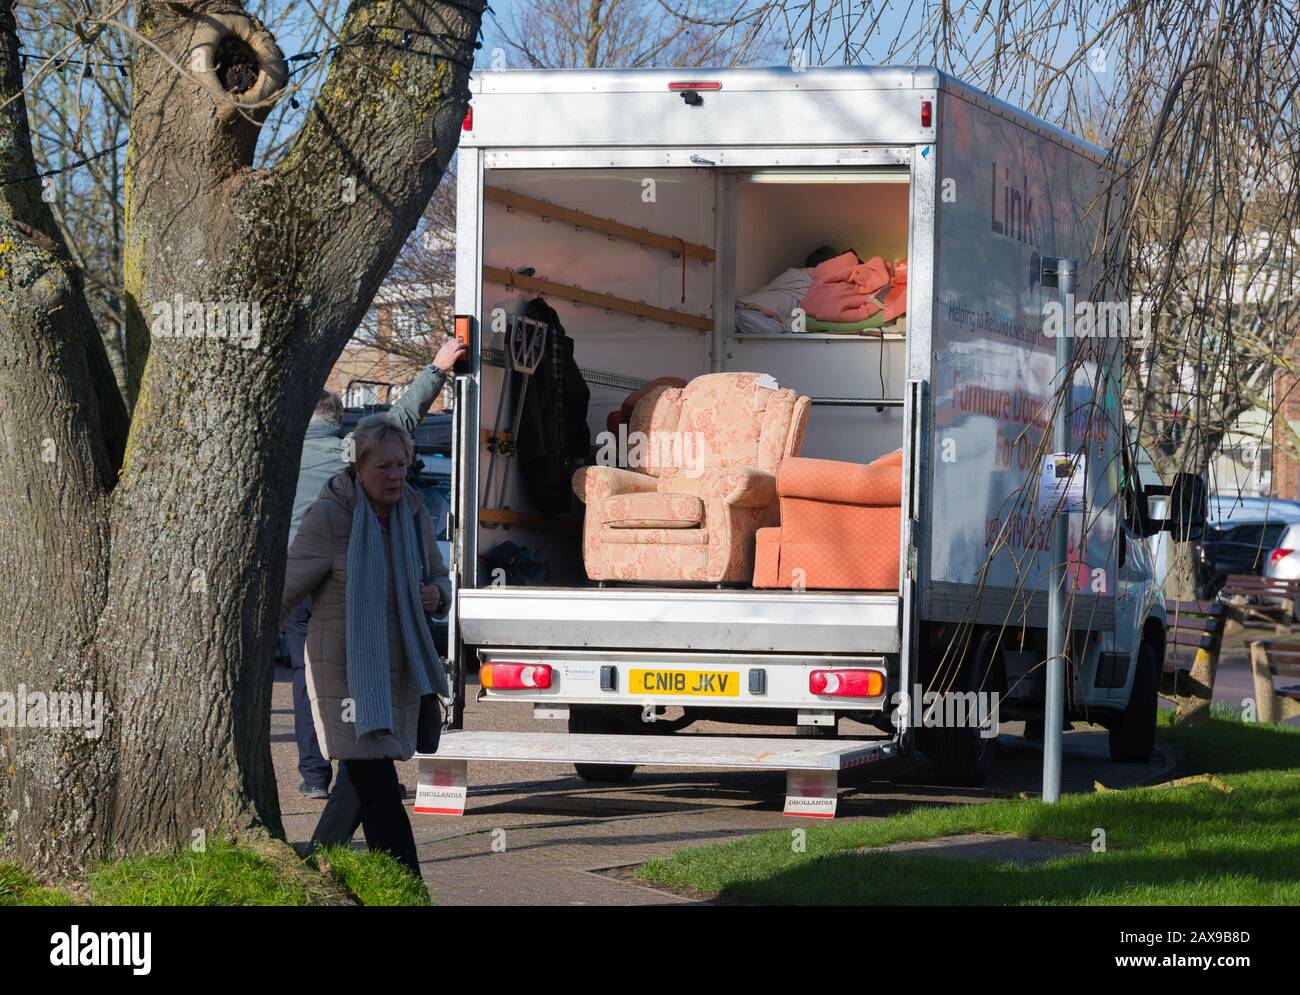 https://c8.alamy.com/comp/2AX9B8D/small-van-being-used-for-house-clearance-loaded-up-with-household-items-like-chairs-and-sofas-possibly-for-used-or-second-hand-sale-2AX9B8D.jpg